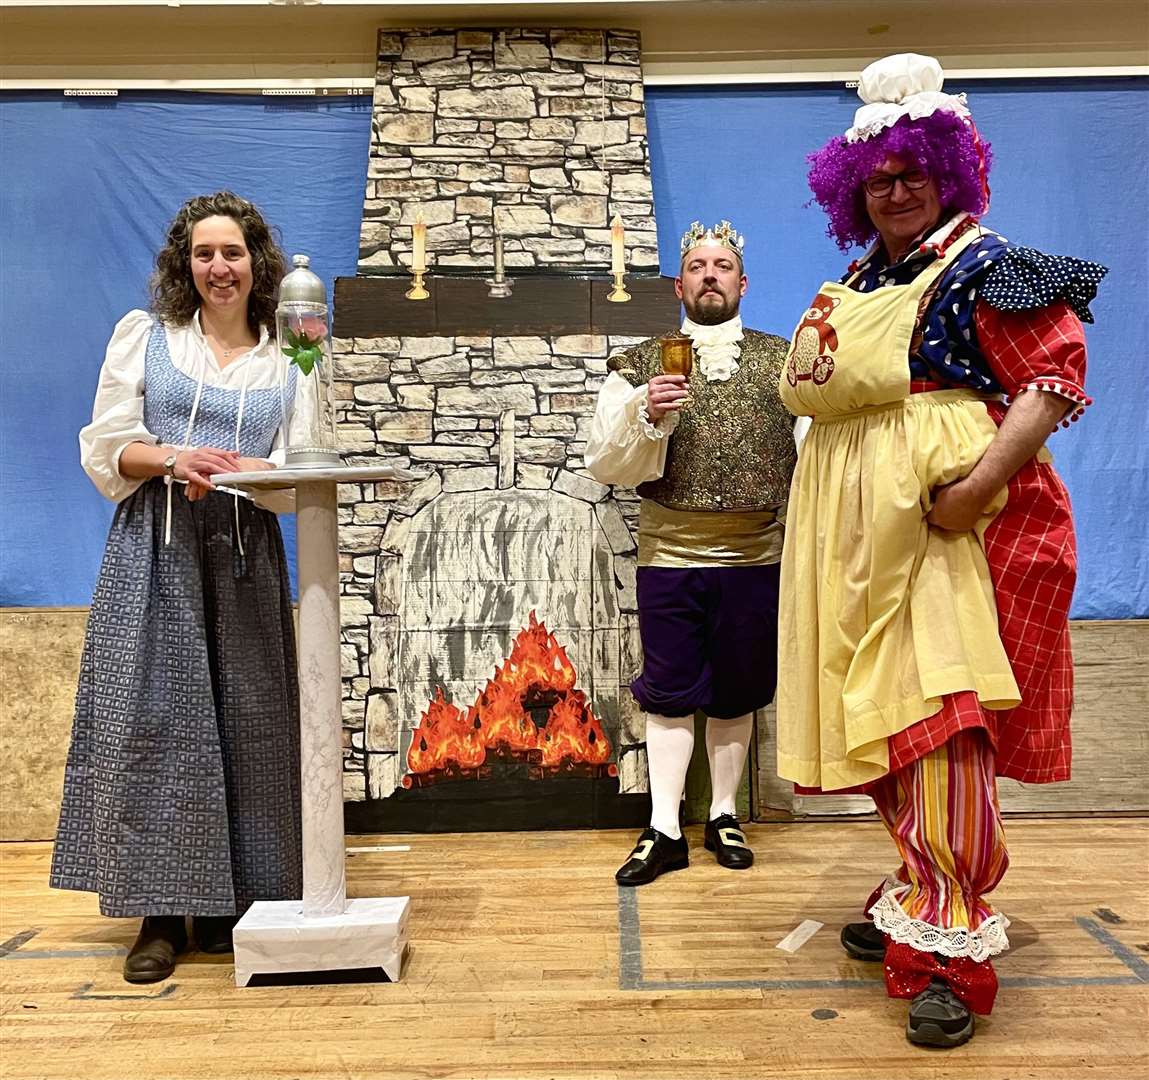 Jenny Craig as Belle, Marc Wiggin as Prince Claude/the Beast and Derrick Thomson as Nanny Nightnurse.Picture: Phul Harman